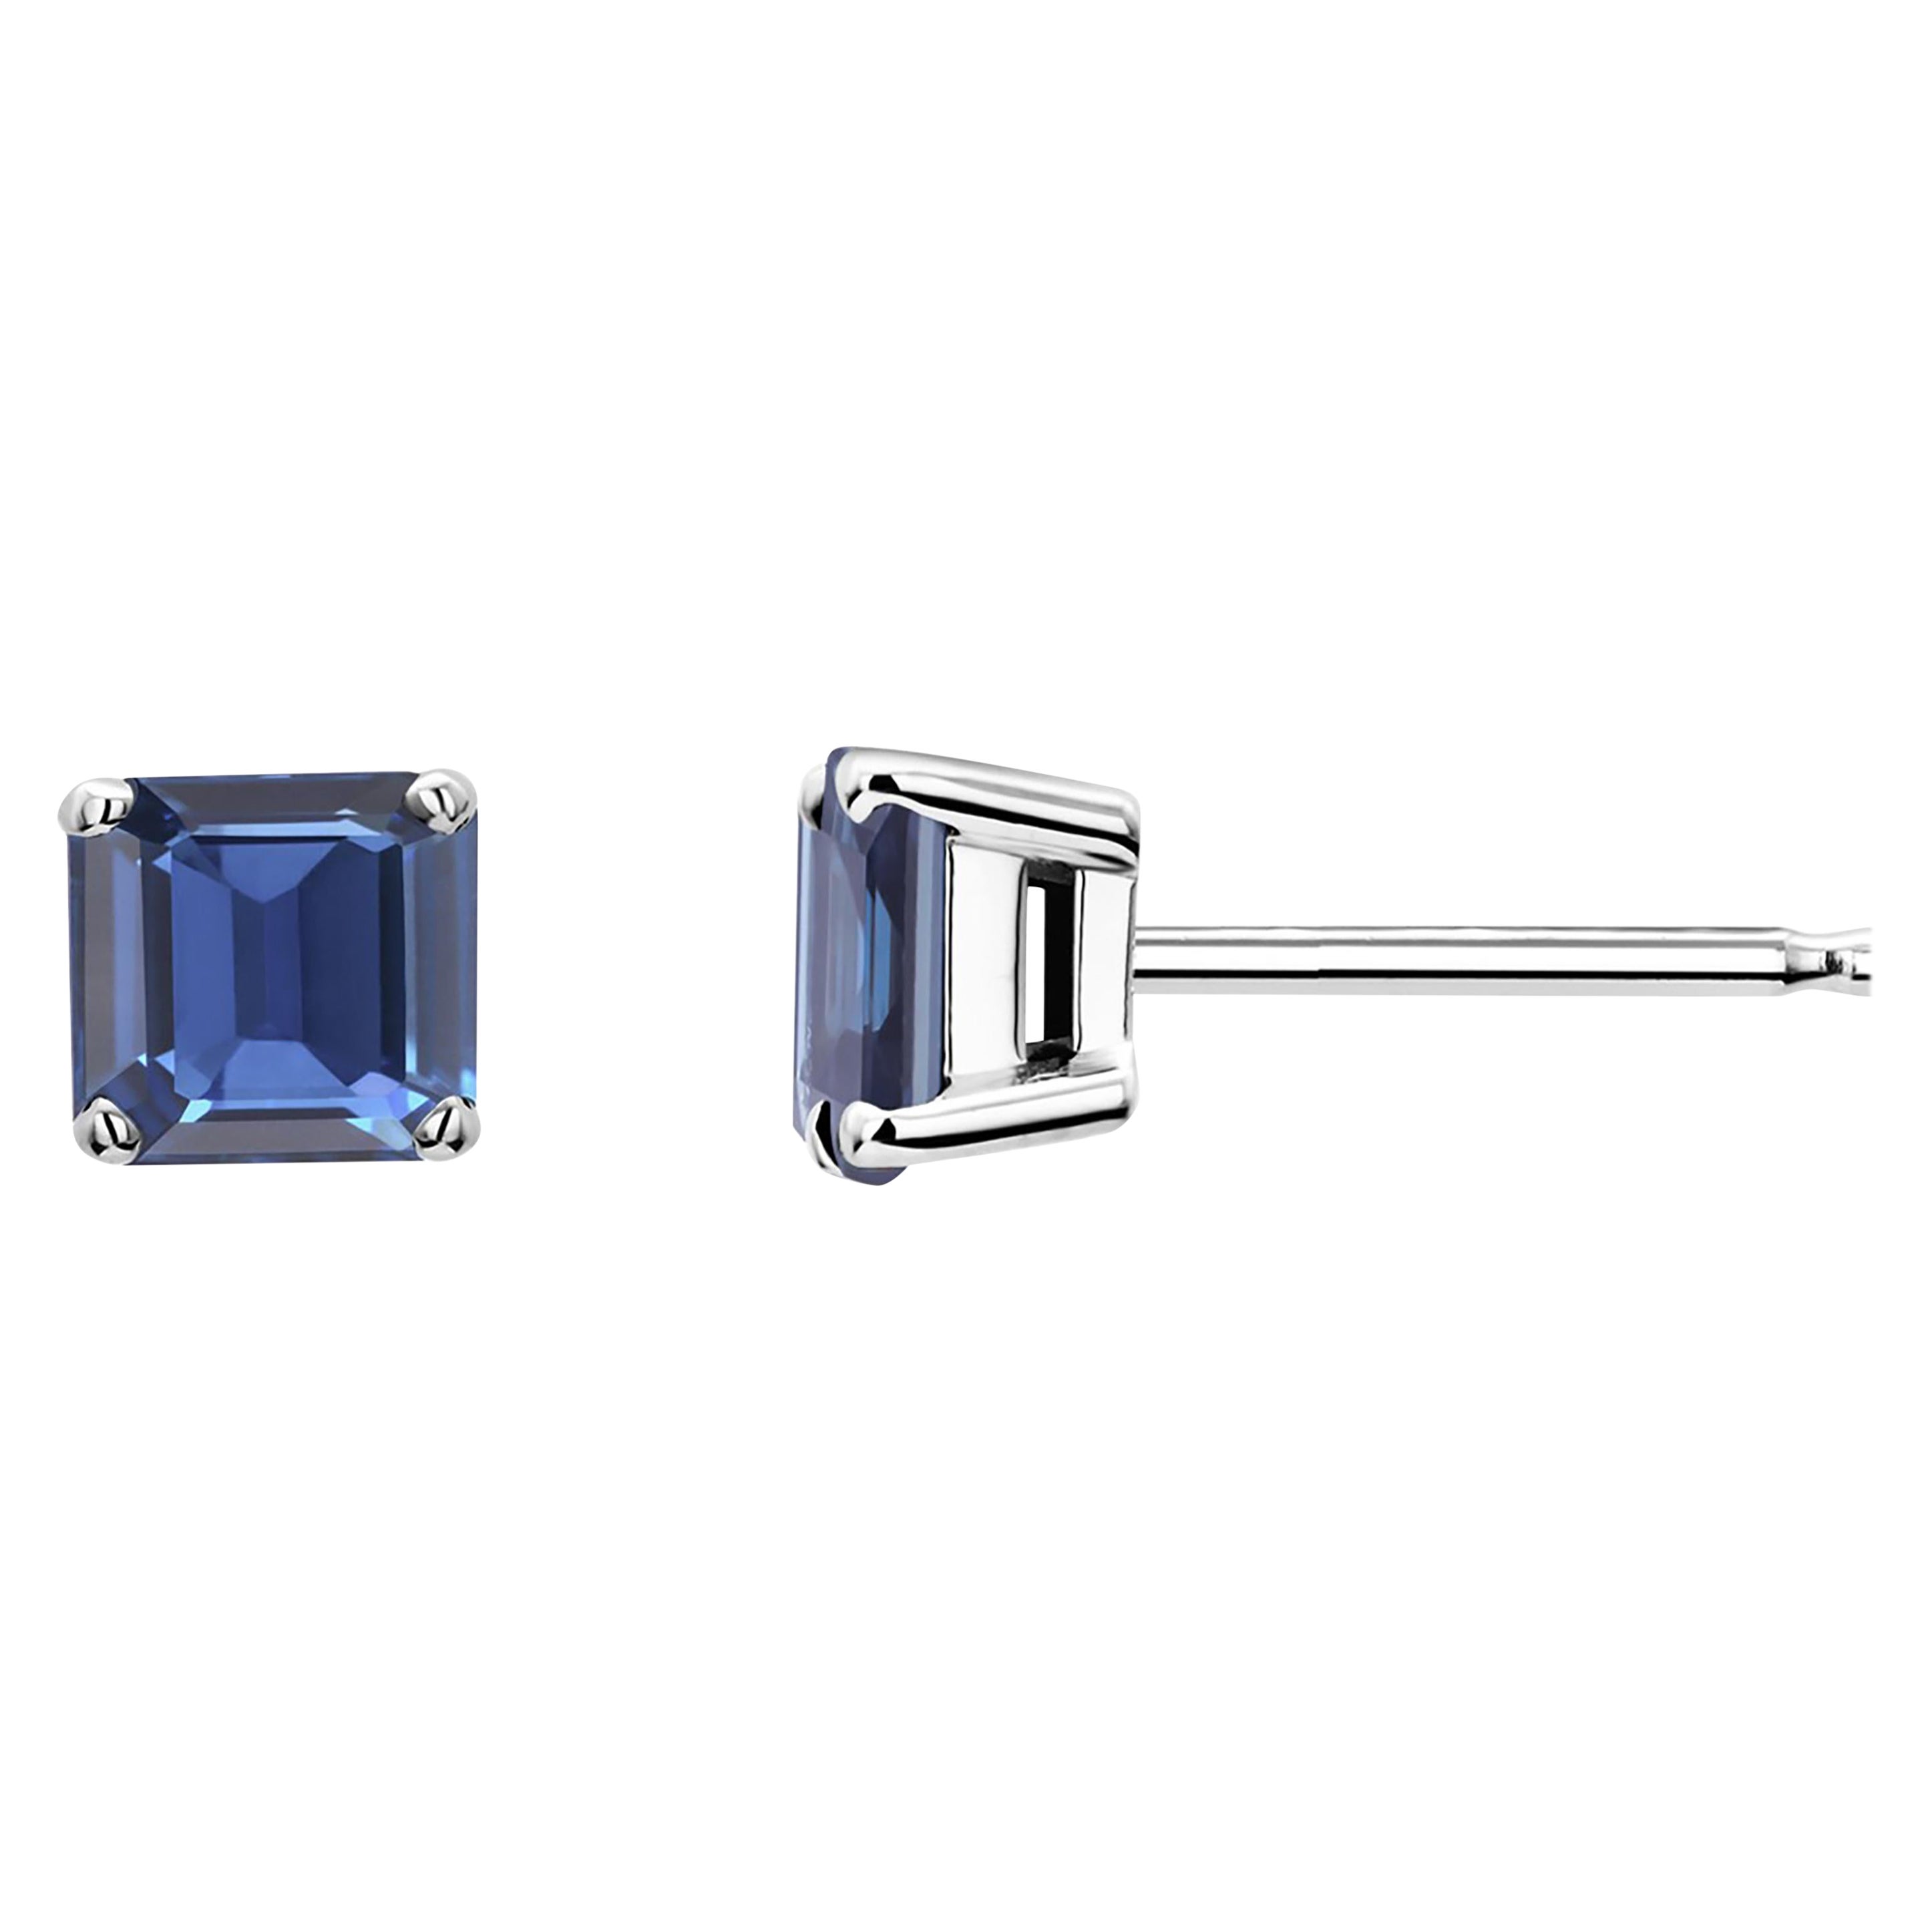 Square Shaped Ceylon Sapphire White Gold Stud Earrings Weighing 1.40 Carats